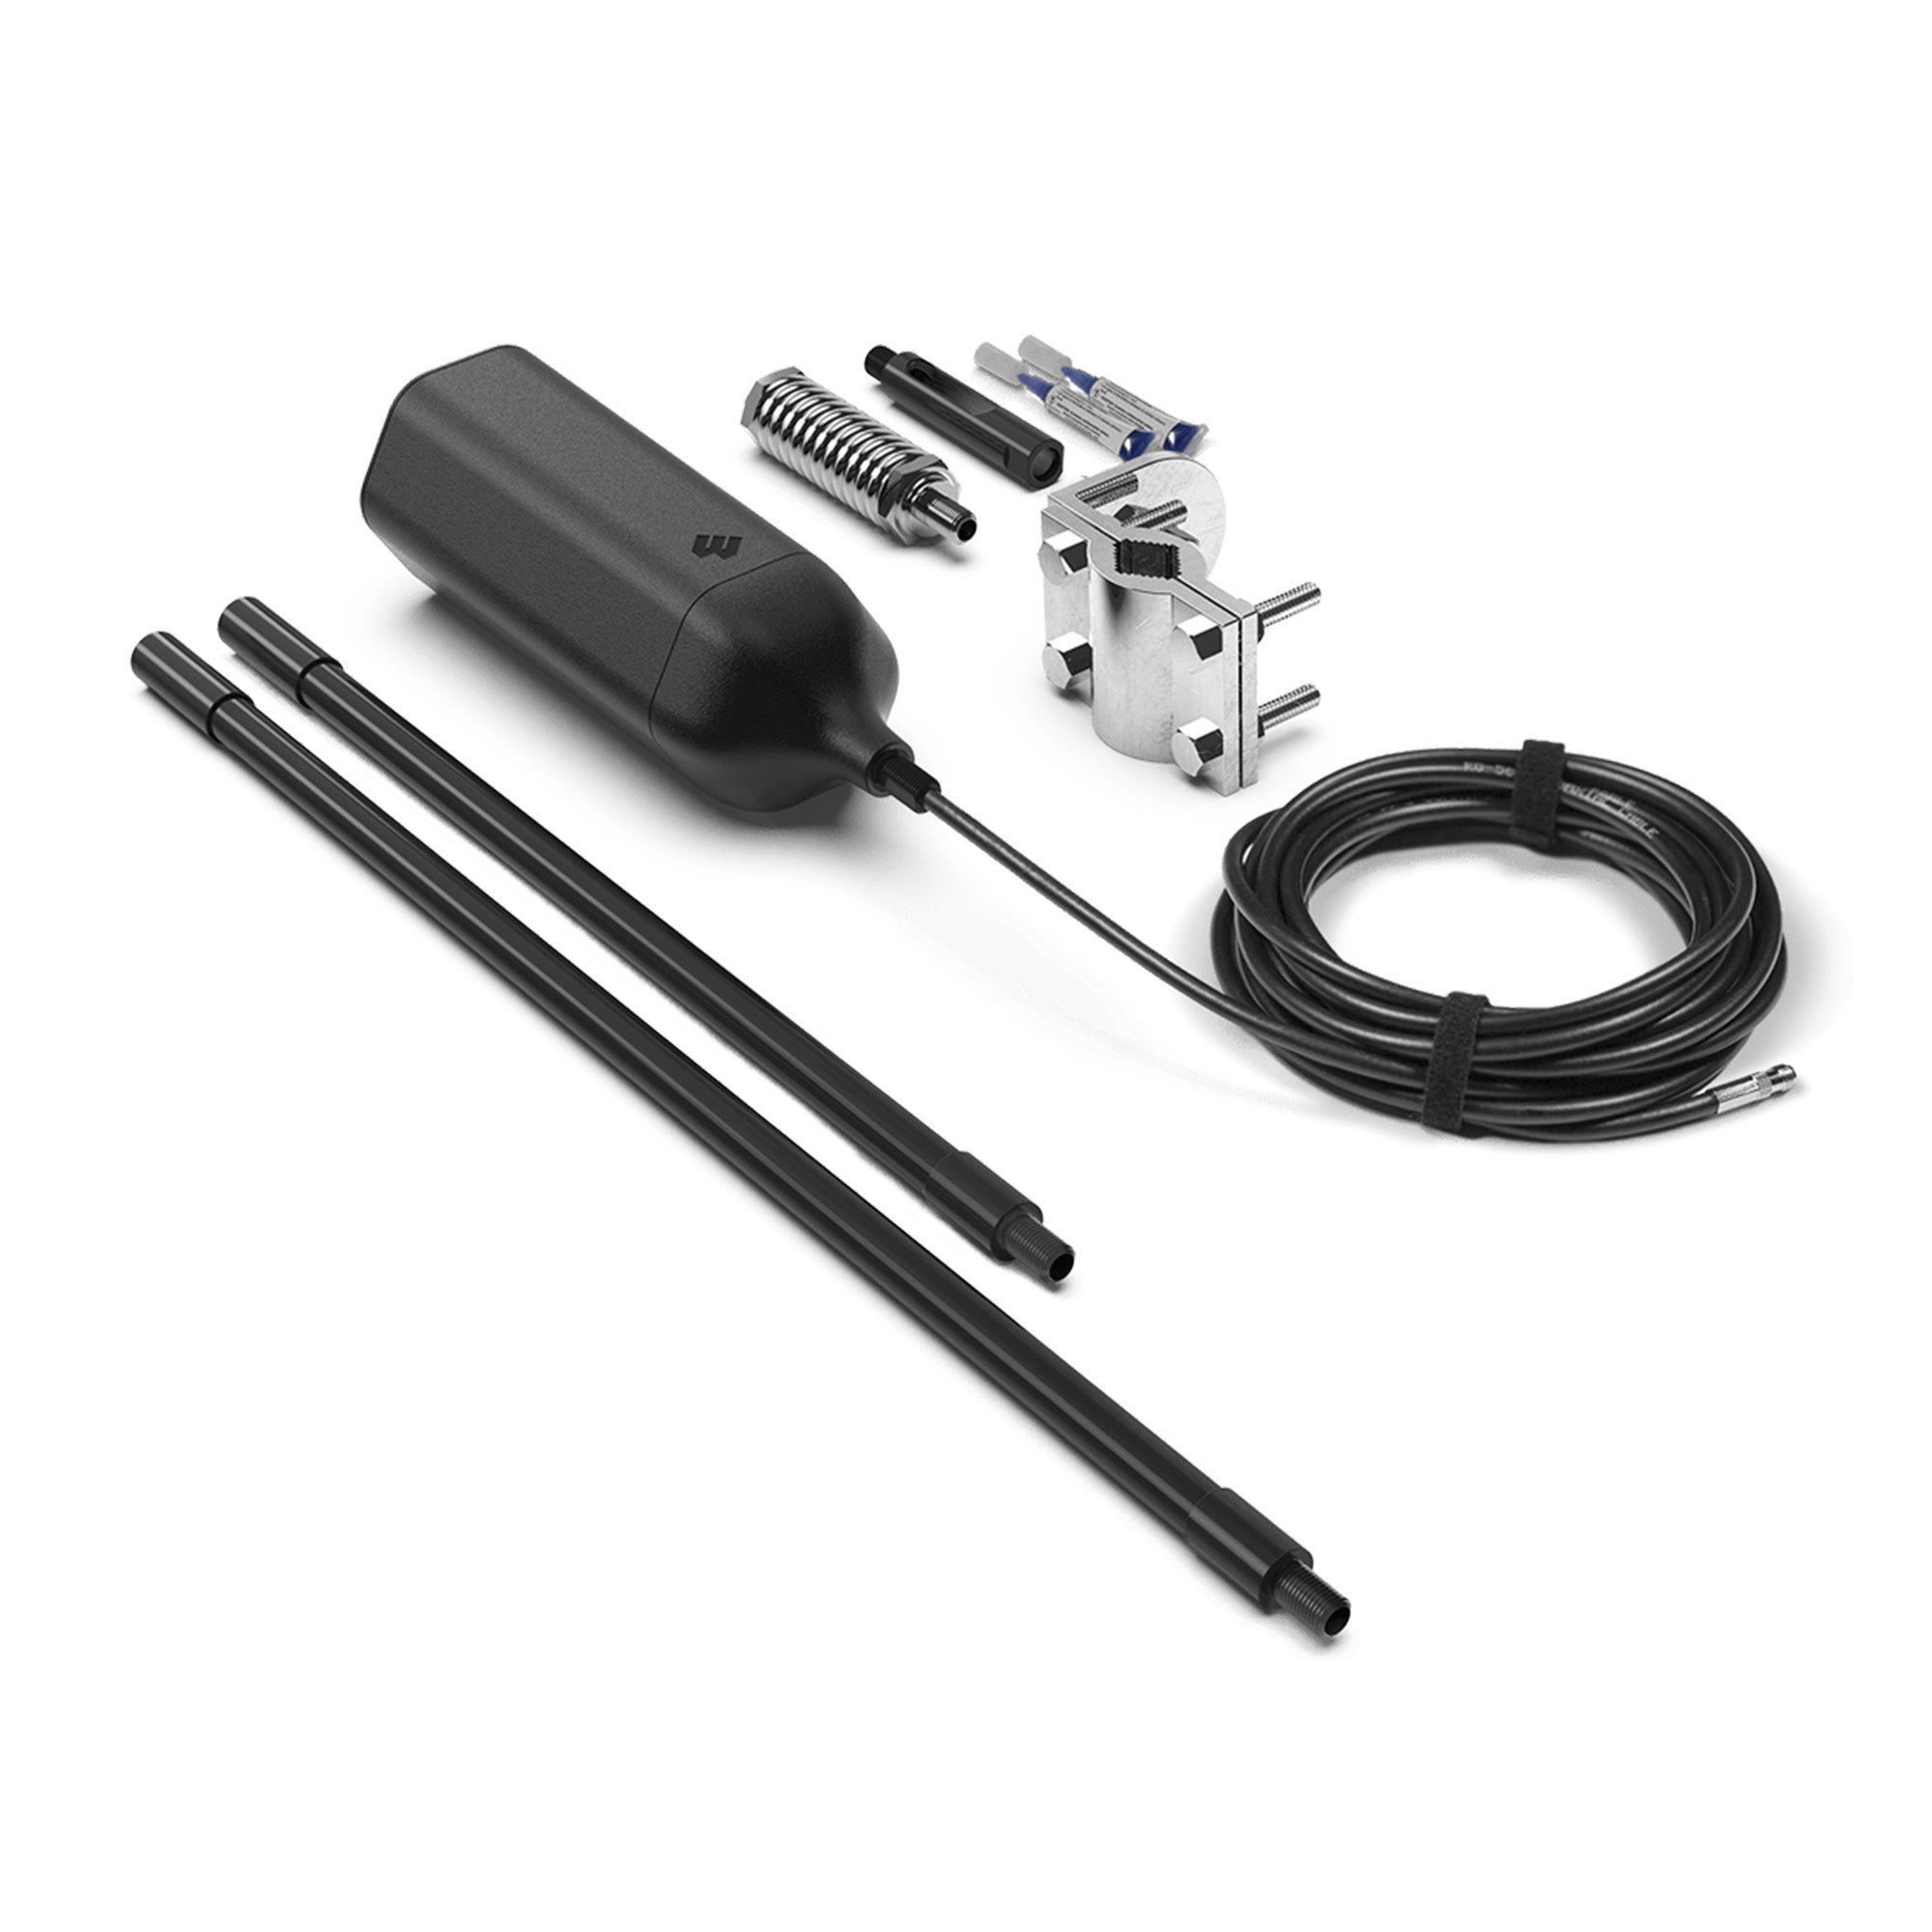 weBoost Drive OTR Antenna for In-Vehicle Signal Boosters w/ SMB Connector